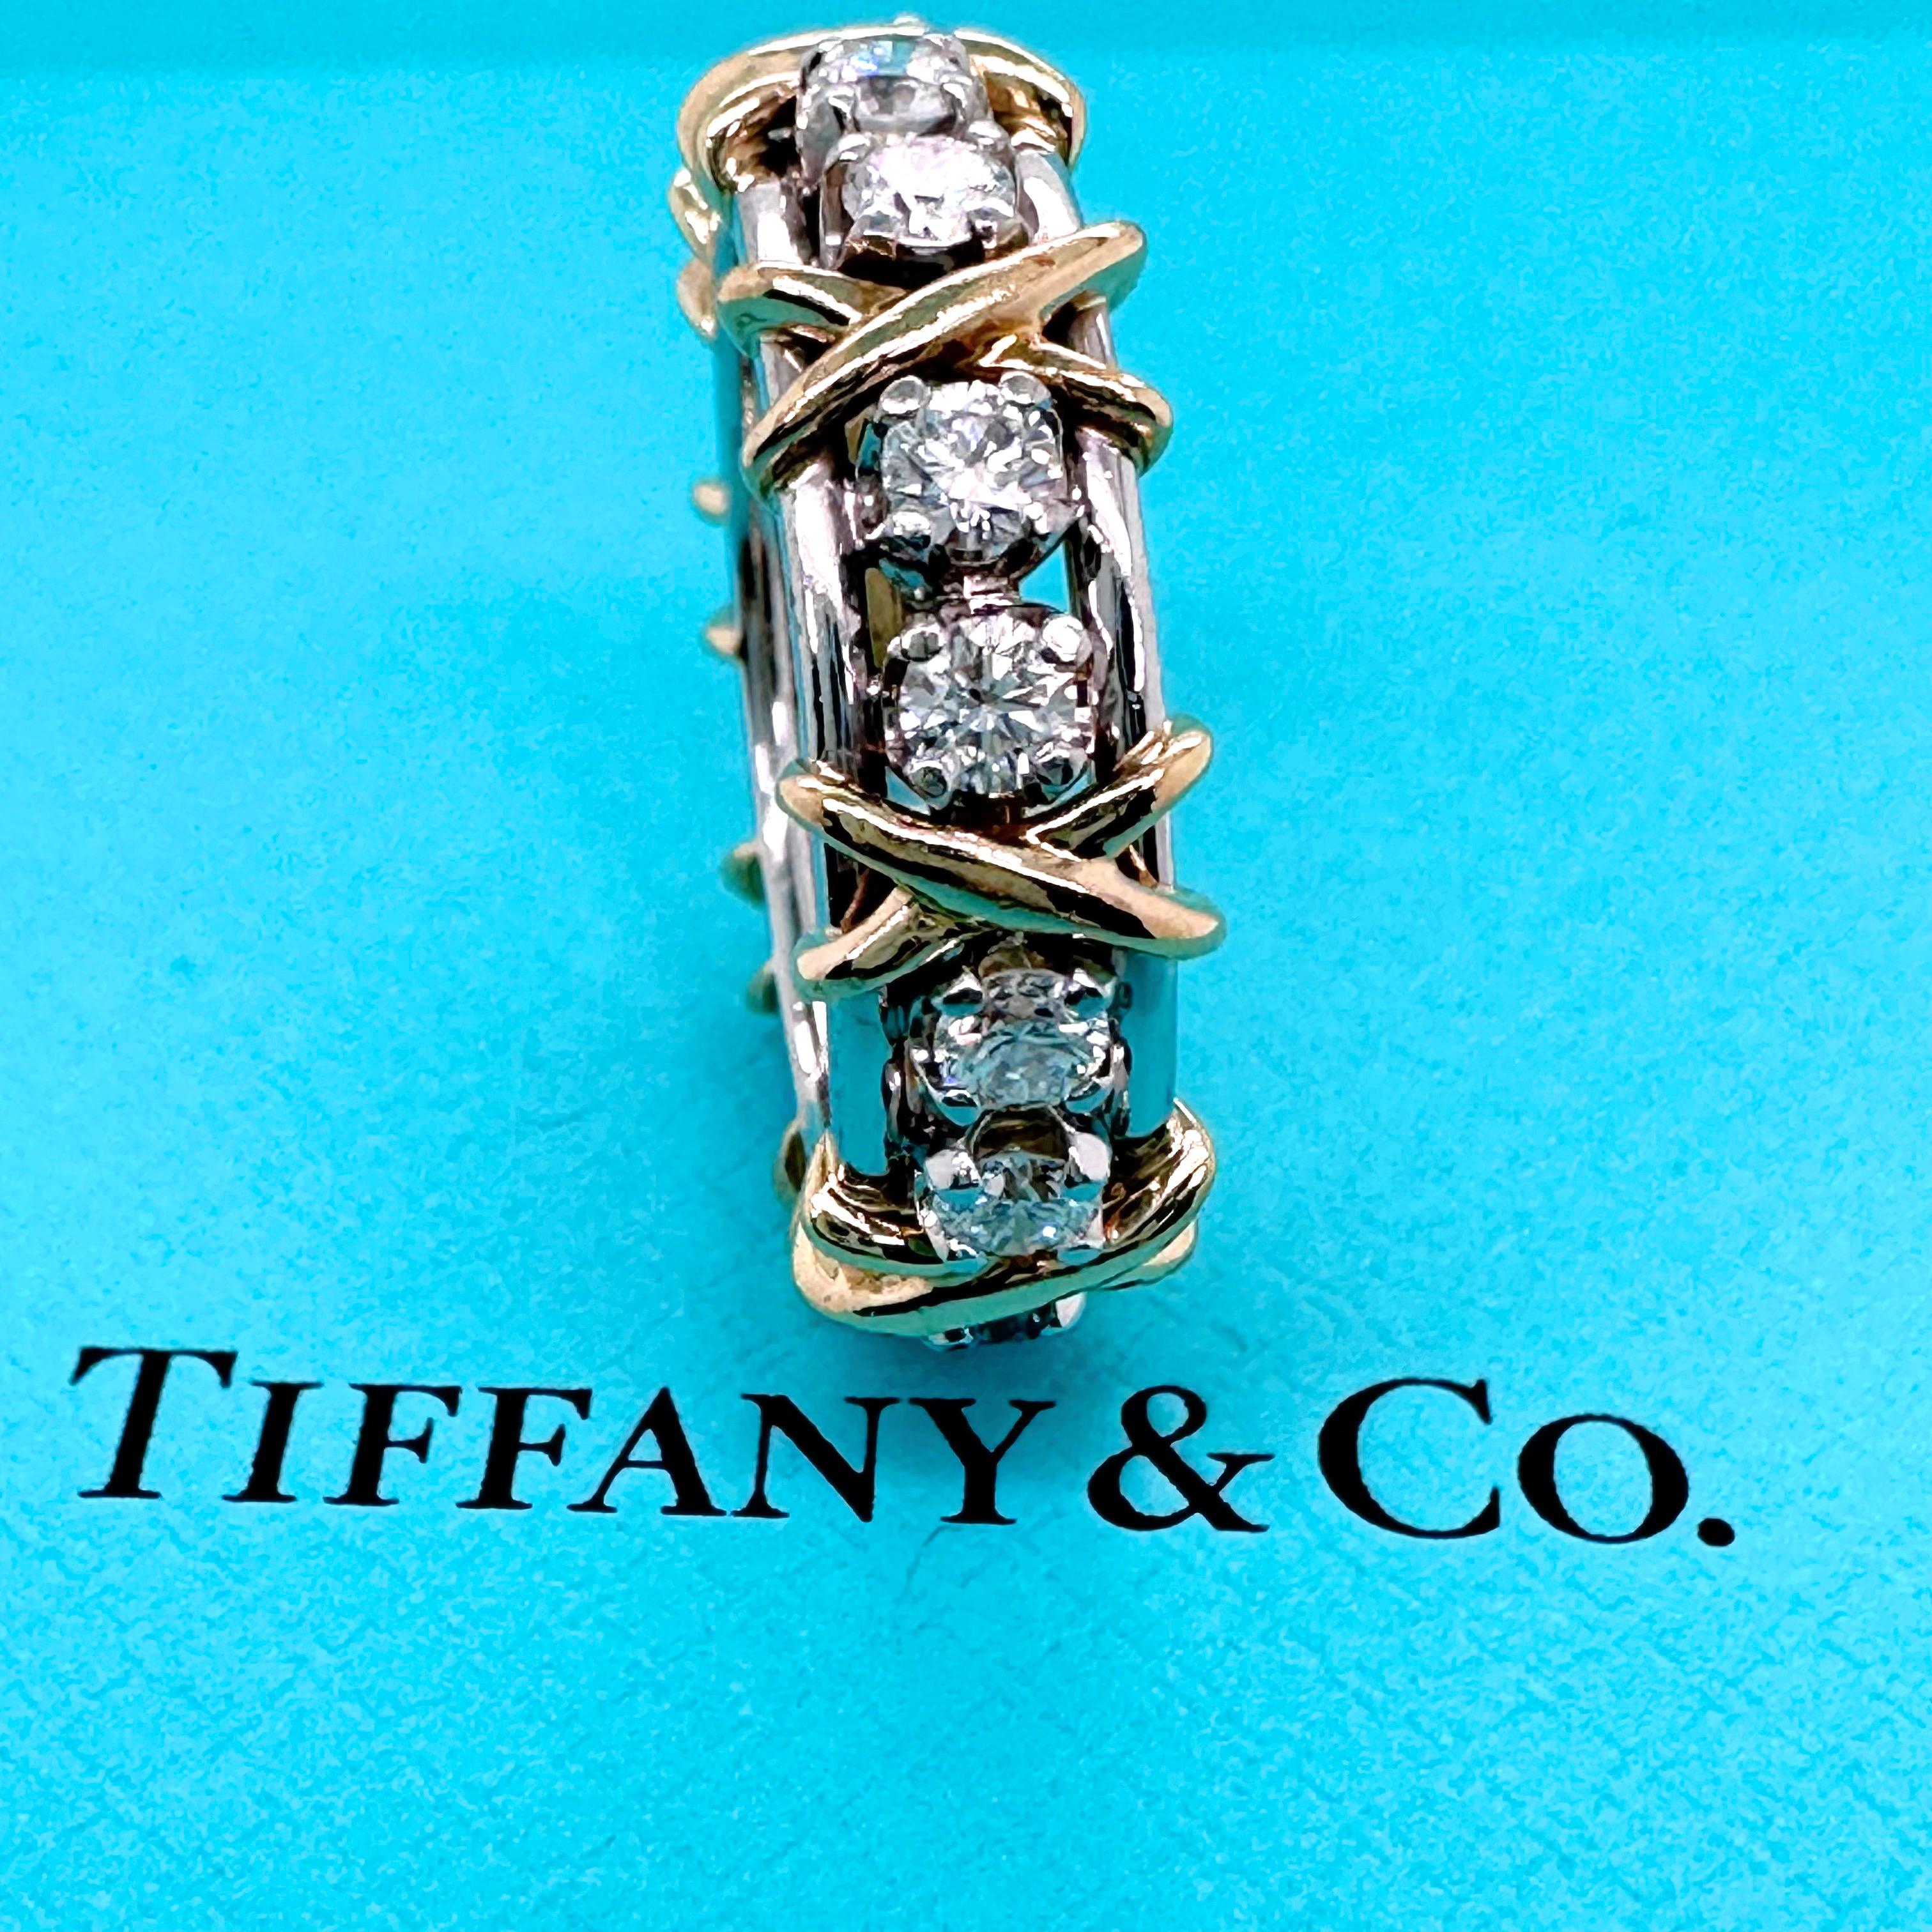 Tiffany & Co. Schlumberger Sixteen Stone Diamond Band Ring
Style:  Band
Ref. number:  600099365
Metal:  Platinum PT950 & 18Kt Yellow Gold
Size:  7.5
Measurements:  11 MM
Main Diamond:  16 Round Diamonds 1.14 tcw
Hallmark:  ©TIFFANY&CO. SCHLUMBERGER